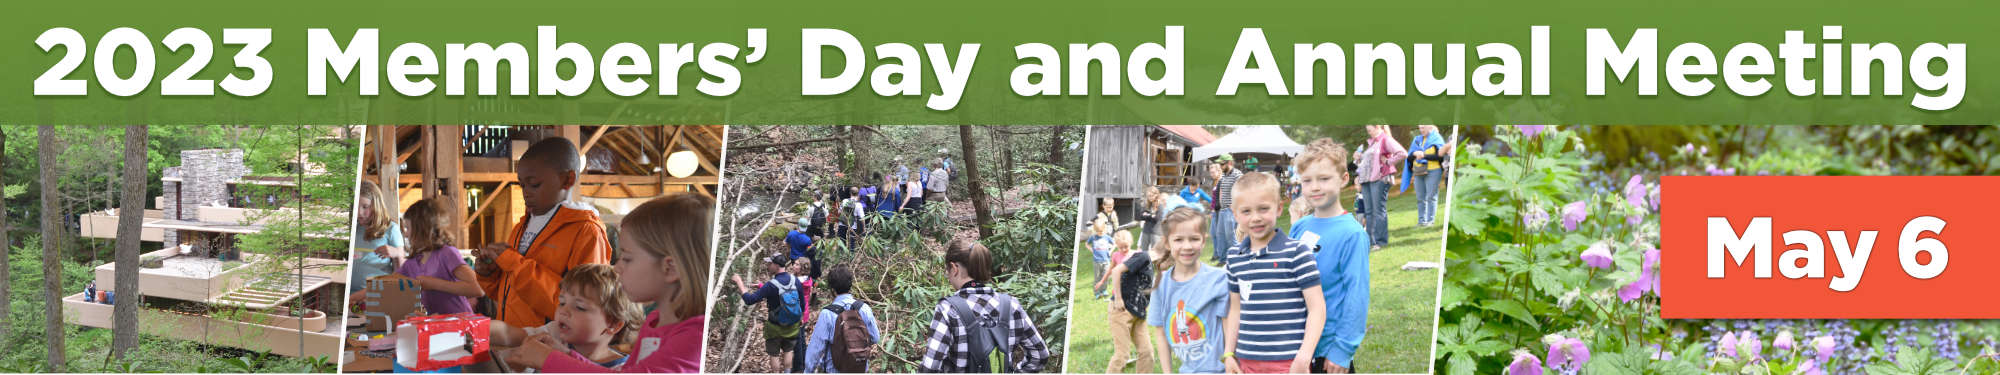 Collage of WPC Members of all ages enjoying Members' Day activities and Fallingwater, the Barn at Fallingwater, and Bear Run Nature Reserve.